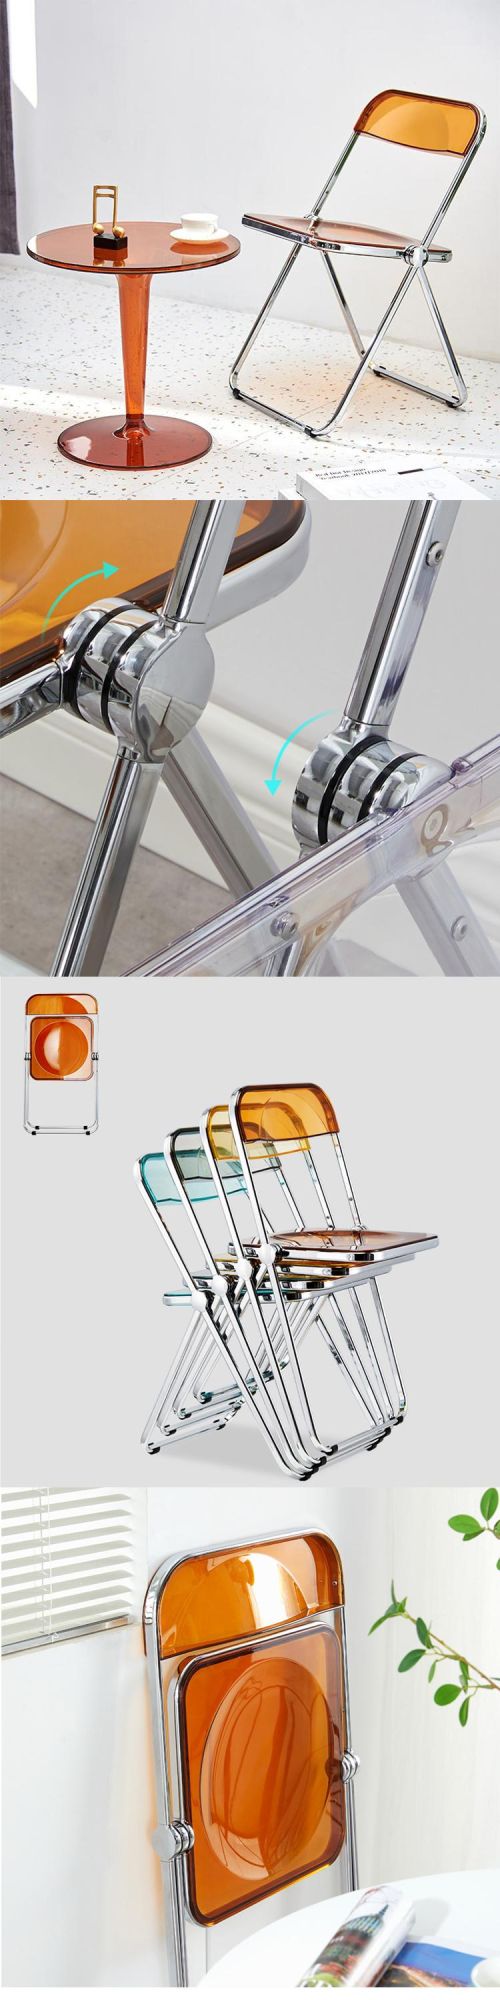 Home Outdoor Furniture Transparent Colorful Acrylic Dining Chair for Wedding Banquet